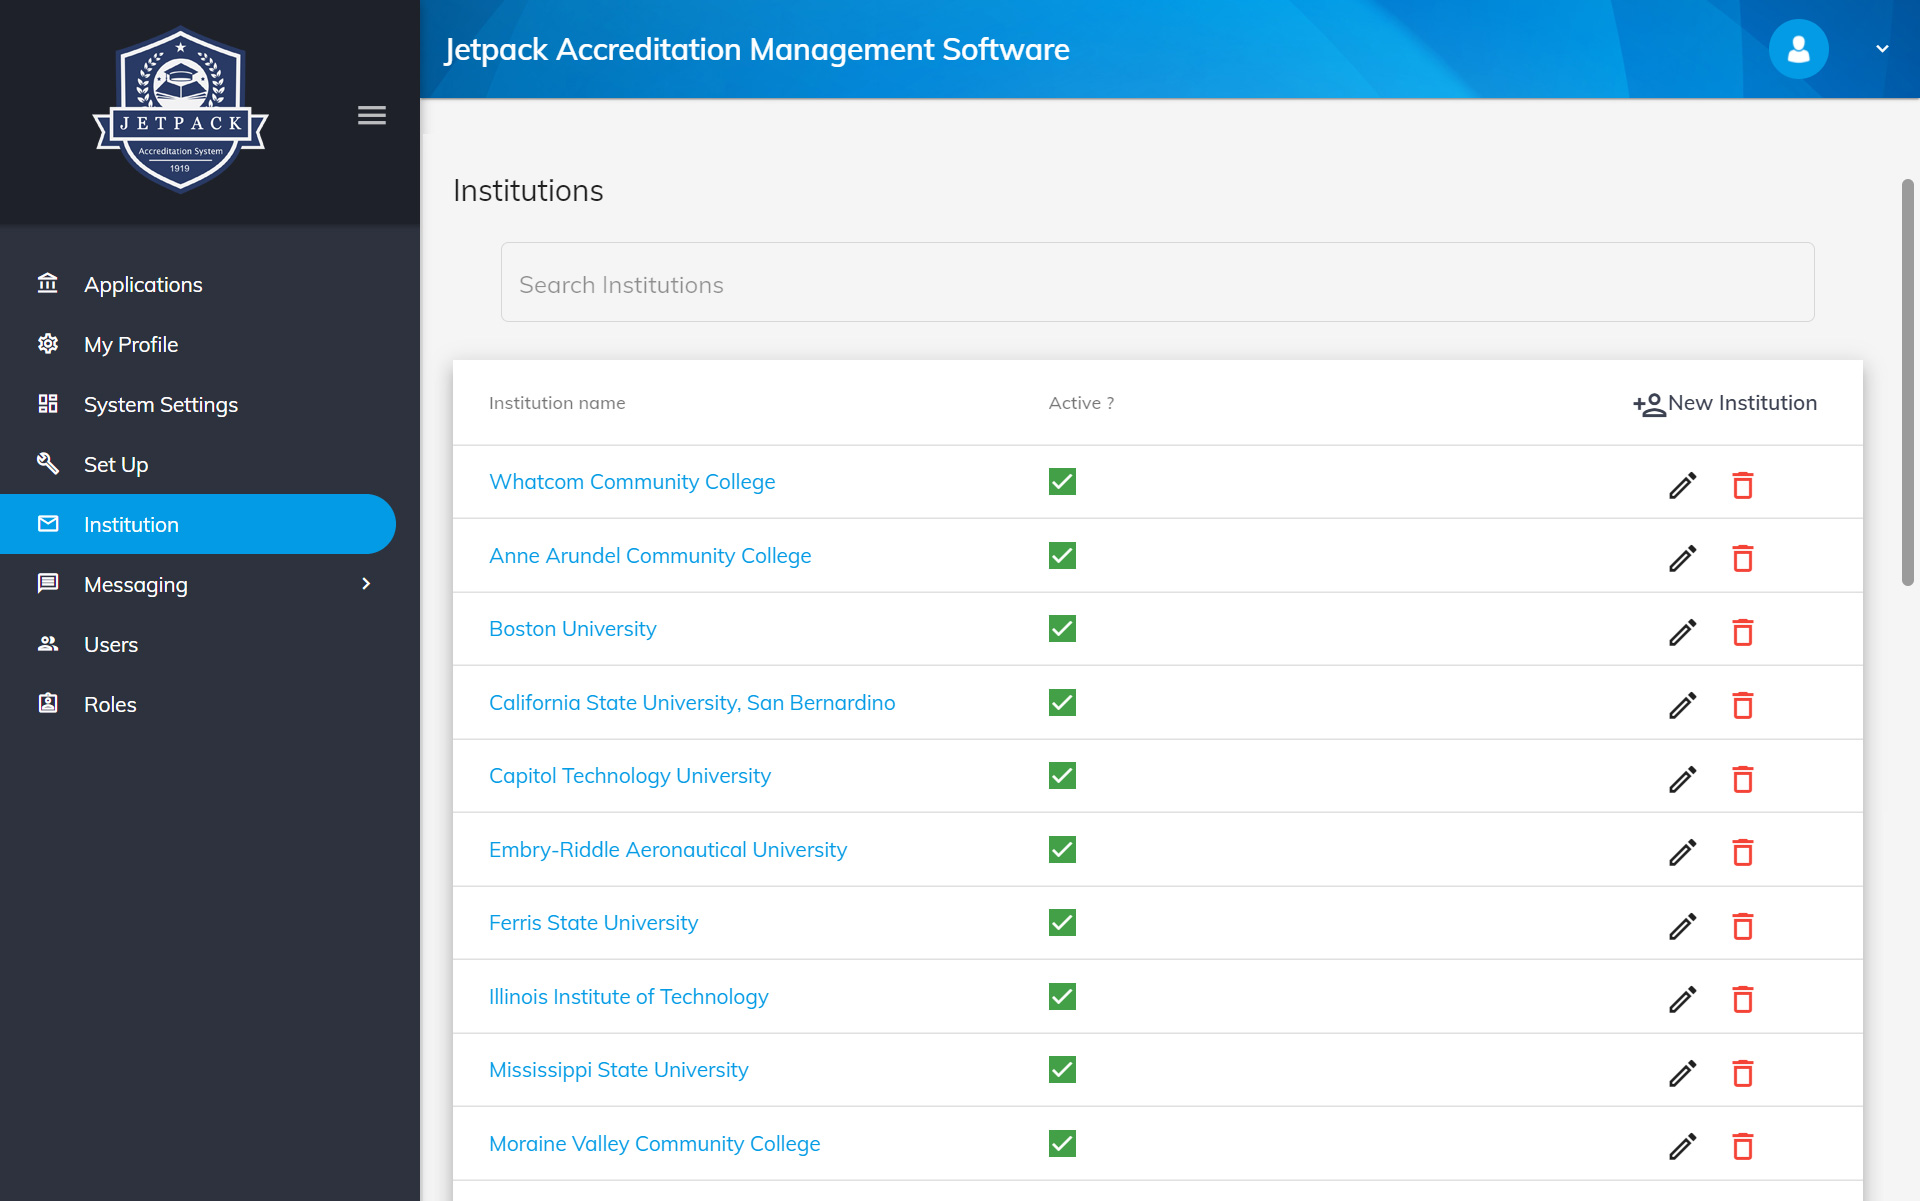 Jetpack Accreditation Management find or add institutions